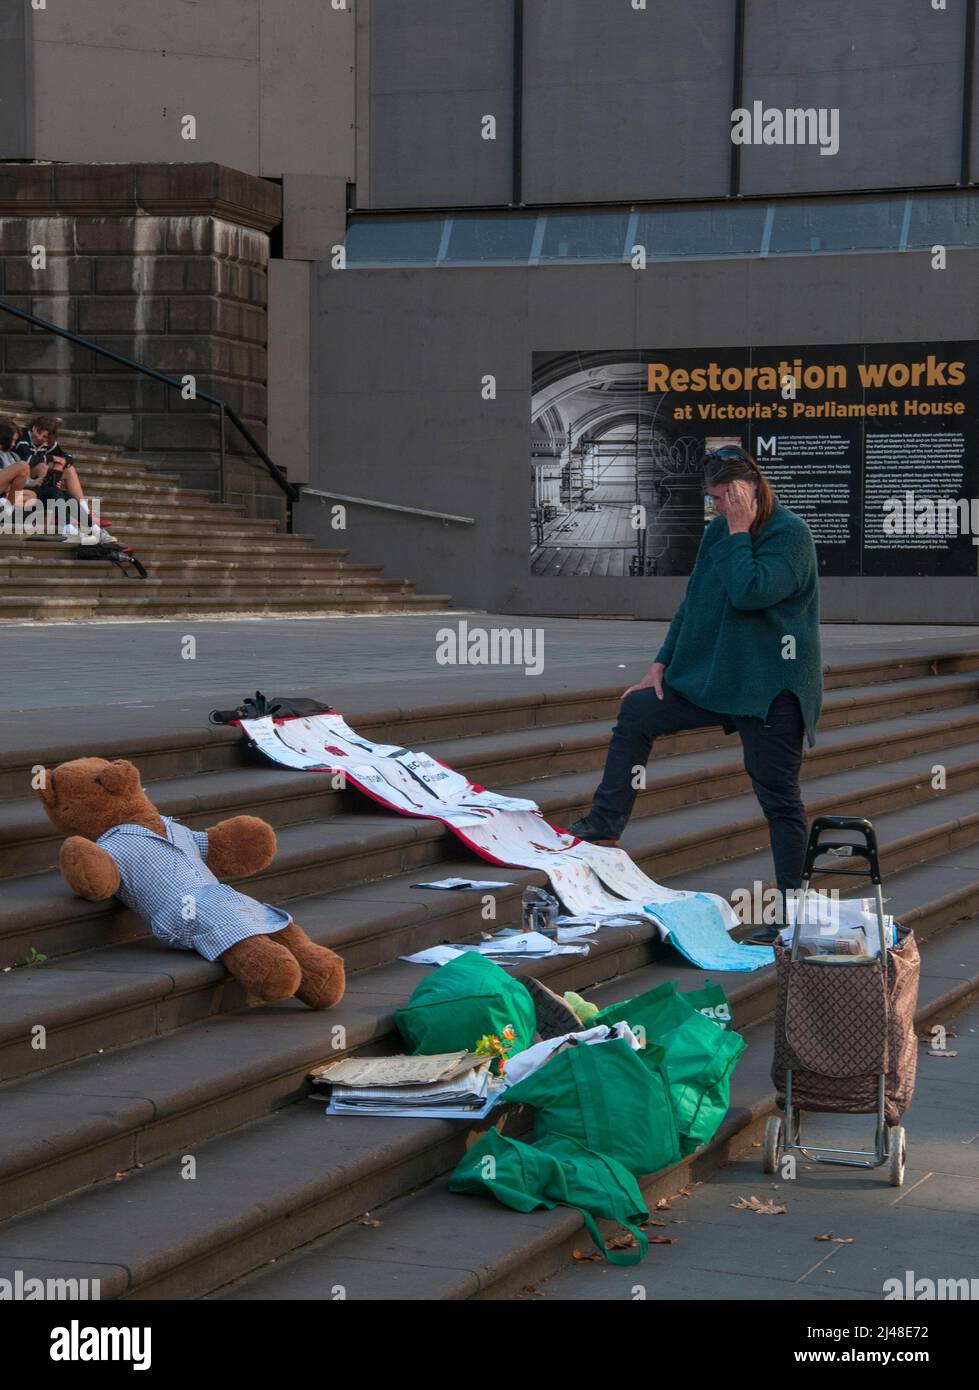 Lone protestor setting up for the day at State Parliament on Spring Street, Melbourne Stock Photo